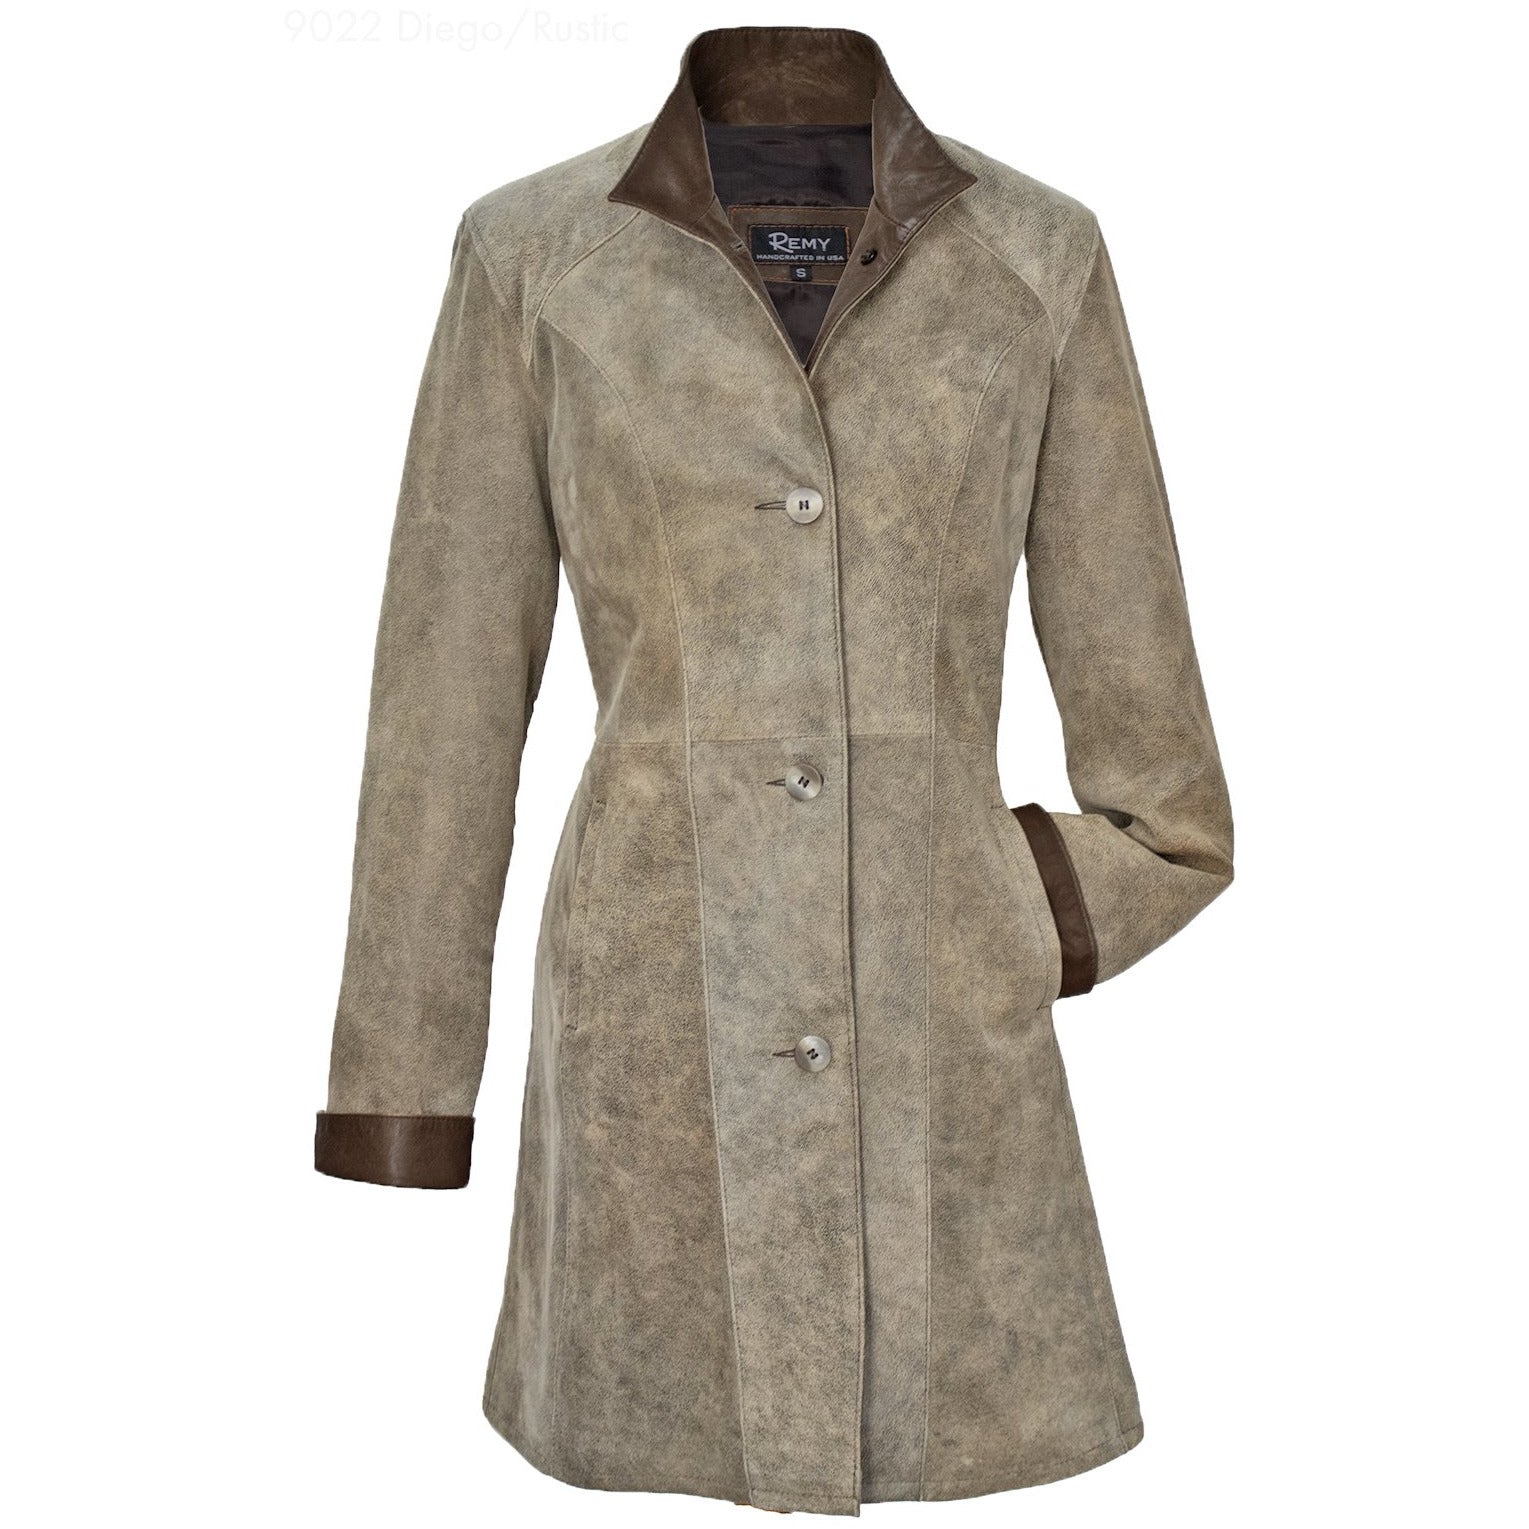 Diego/Rustic Leather Remy Coat Ladies 9022 Leather - in Swing –